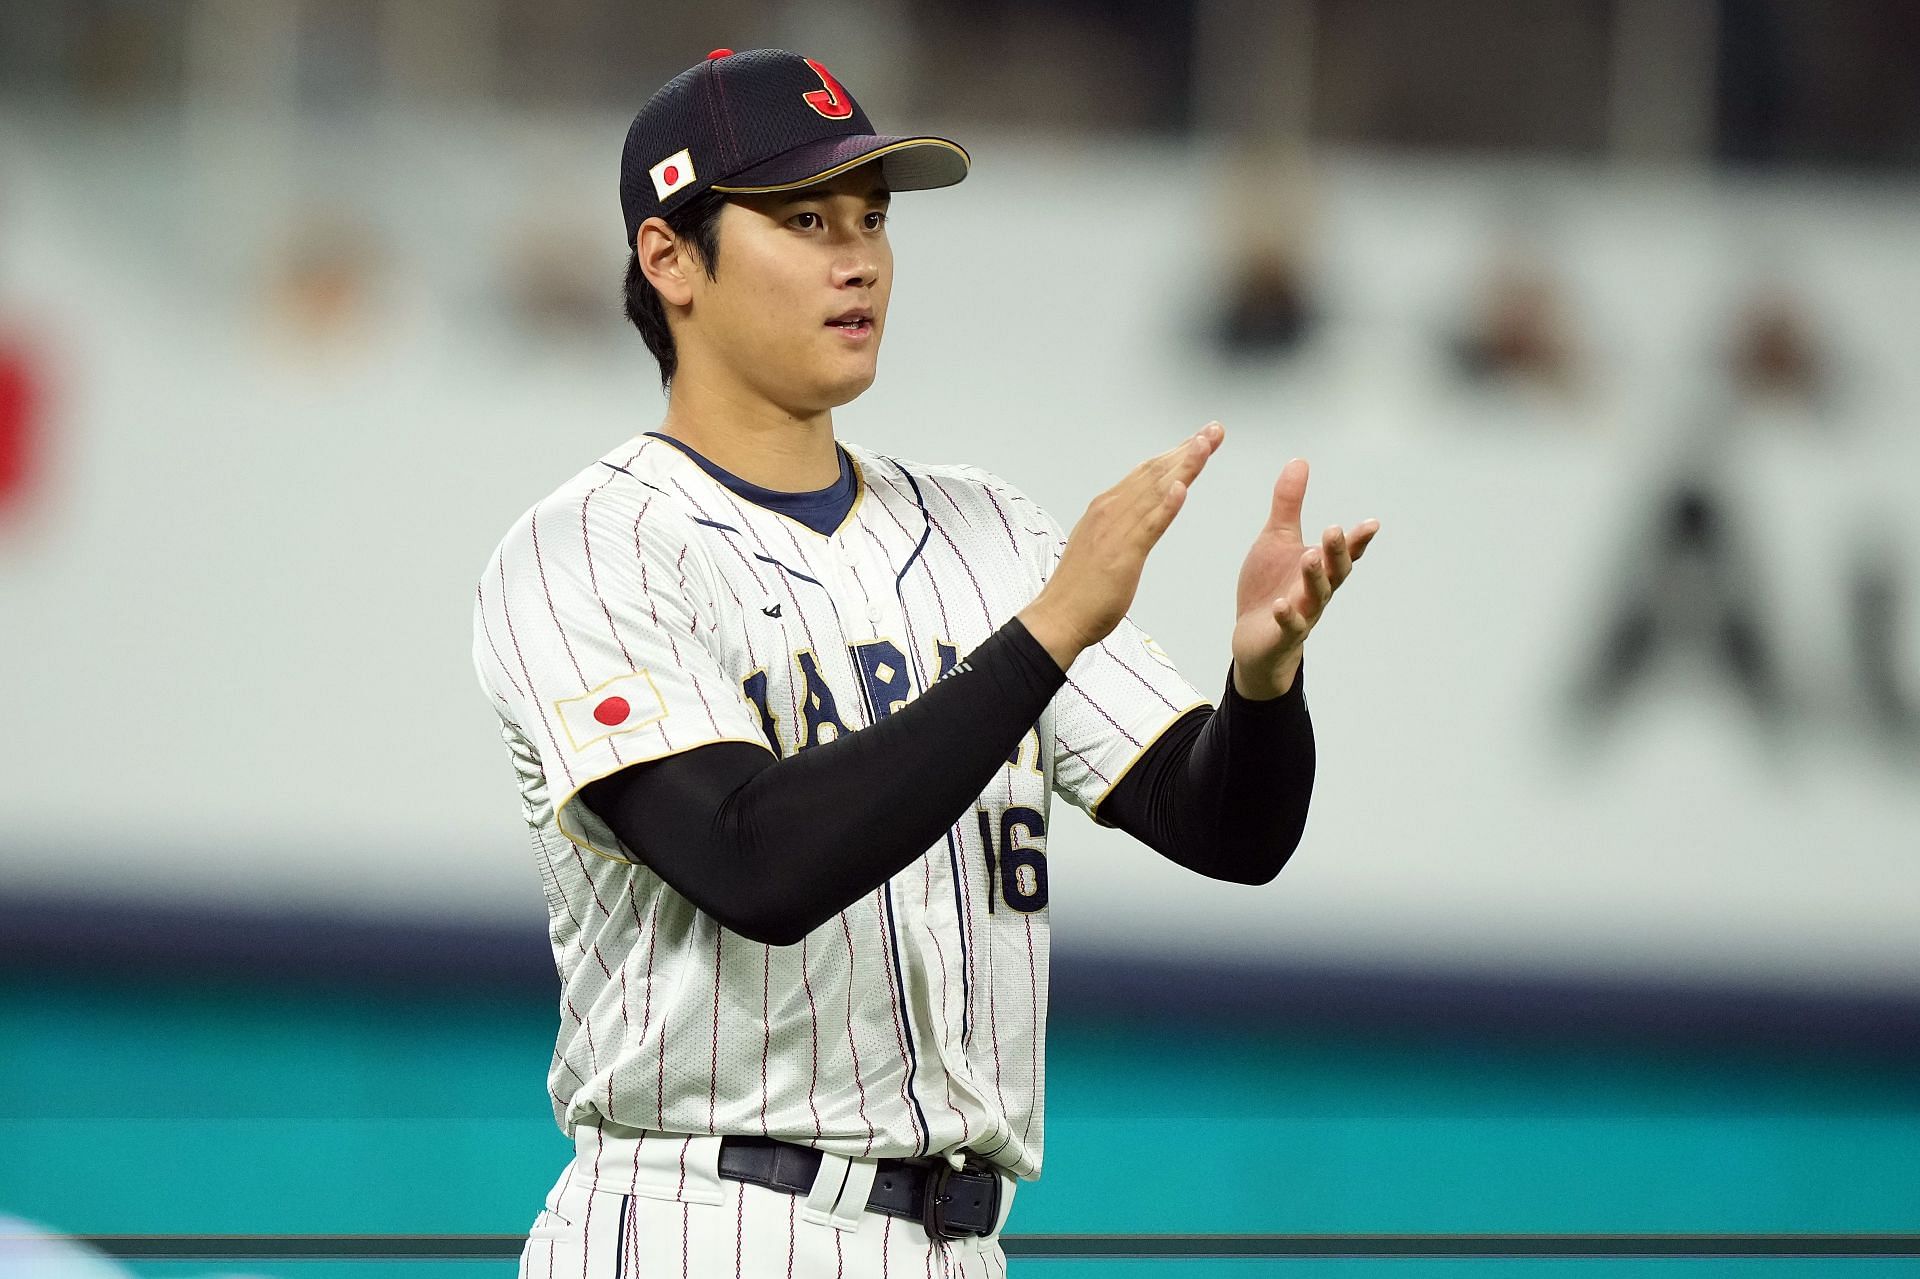 Shohei Ohtani of Team Japan warms up before the World Baseball Classic semifinal against Team Mexico.